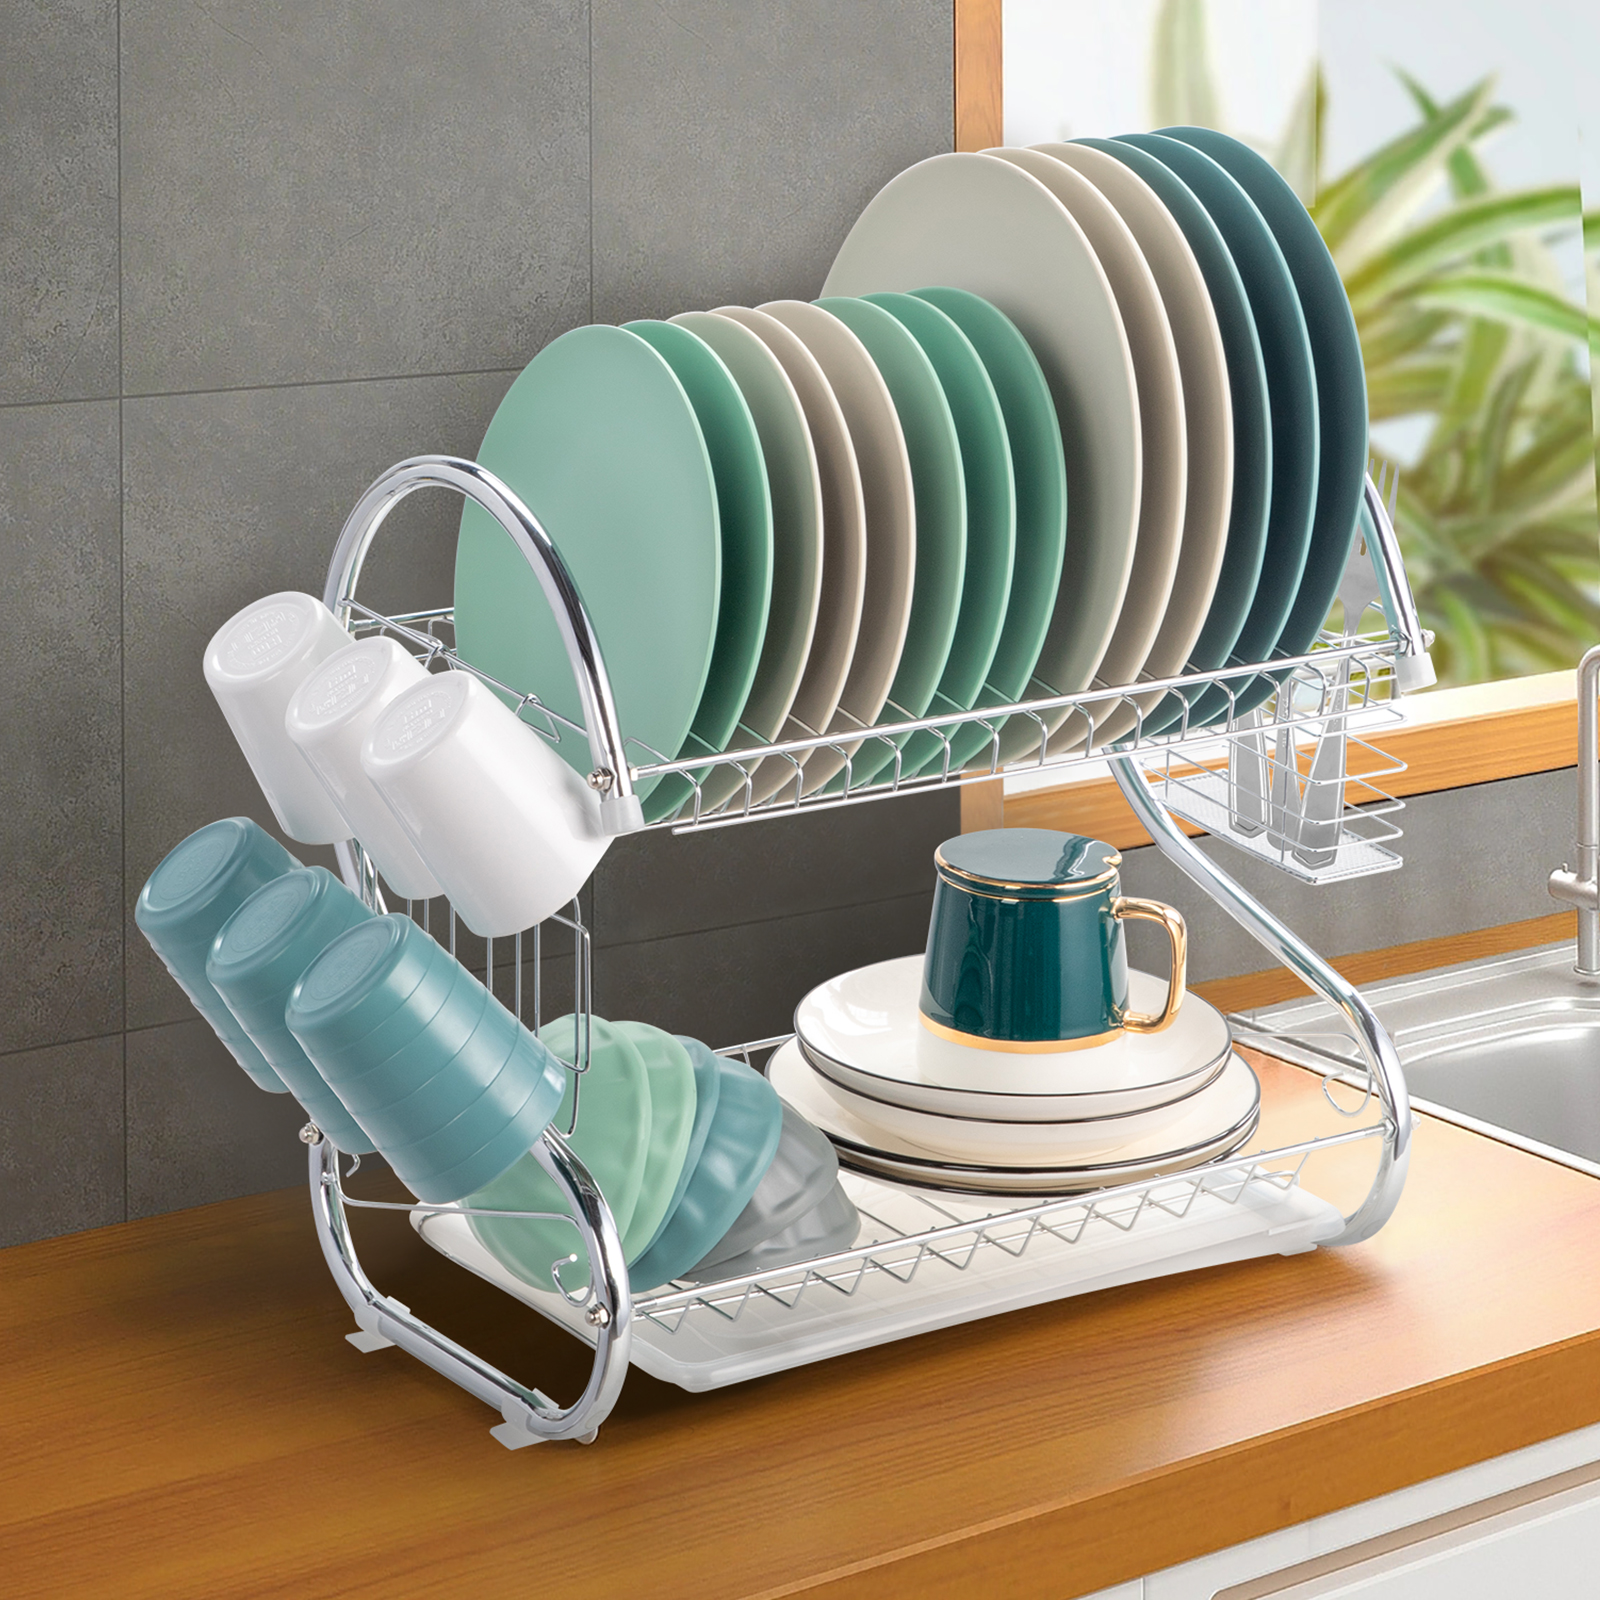 Ktaxon Kitchen Stainless Steel Dish Cup Drying Rack Holder 2-Tier Dish Rack Sink Drainer - image 2 of 11